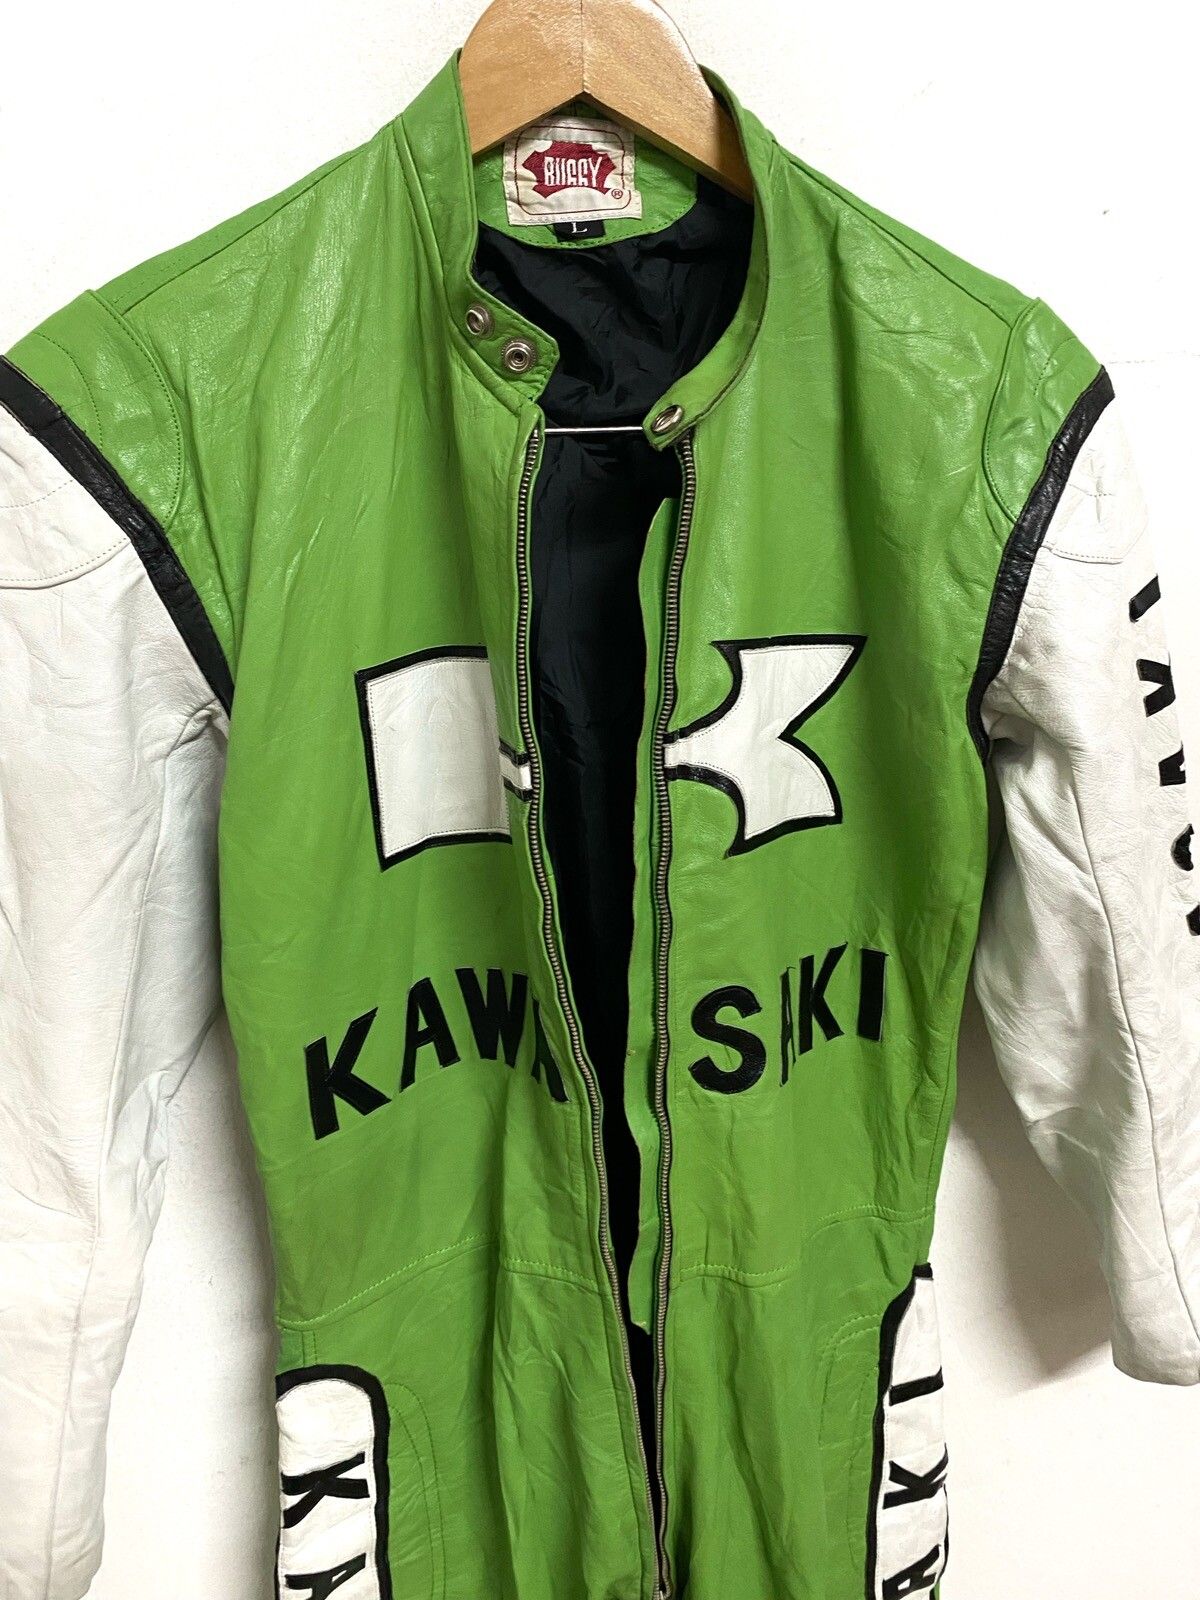 Sports Specialties - KAWASAKI Leather Racing Suit Overall - 5